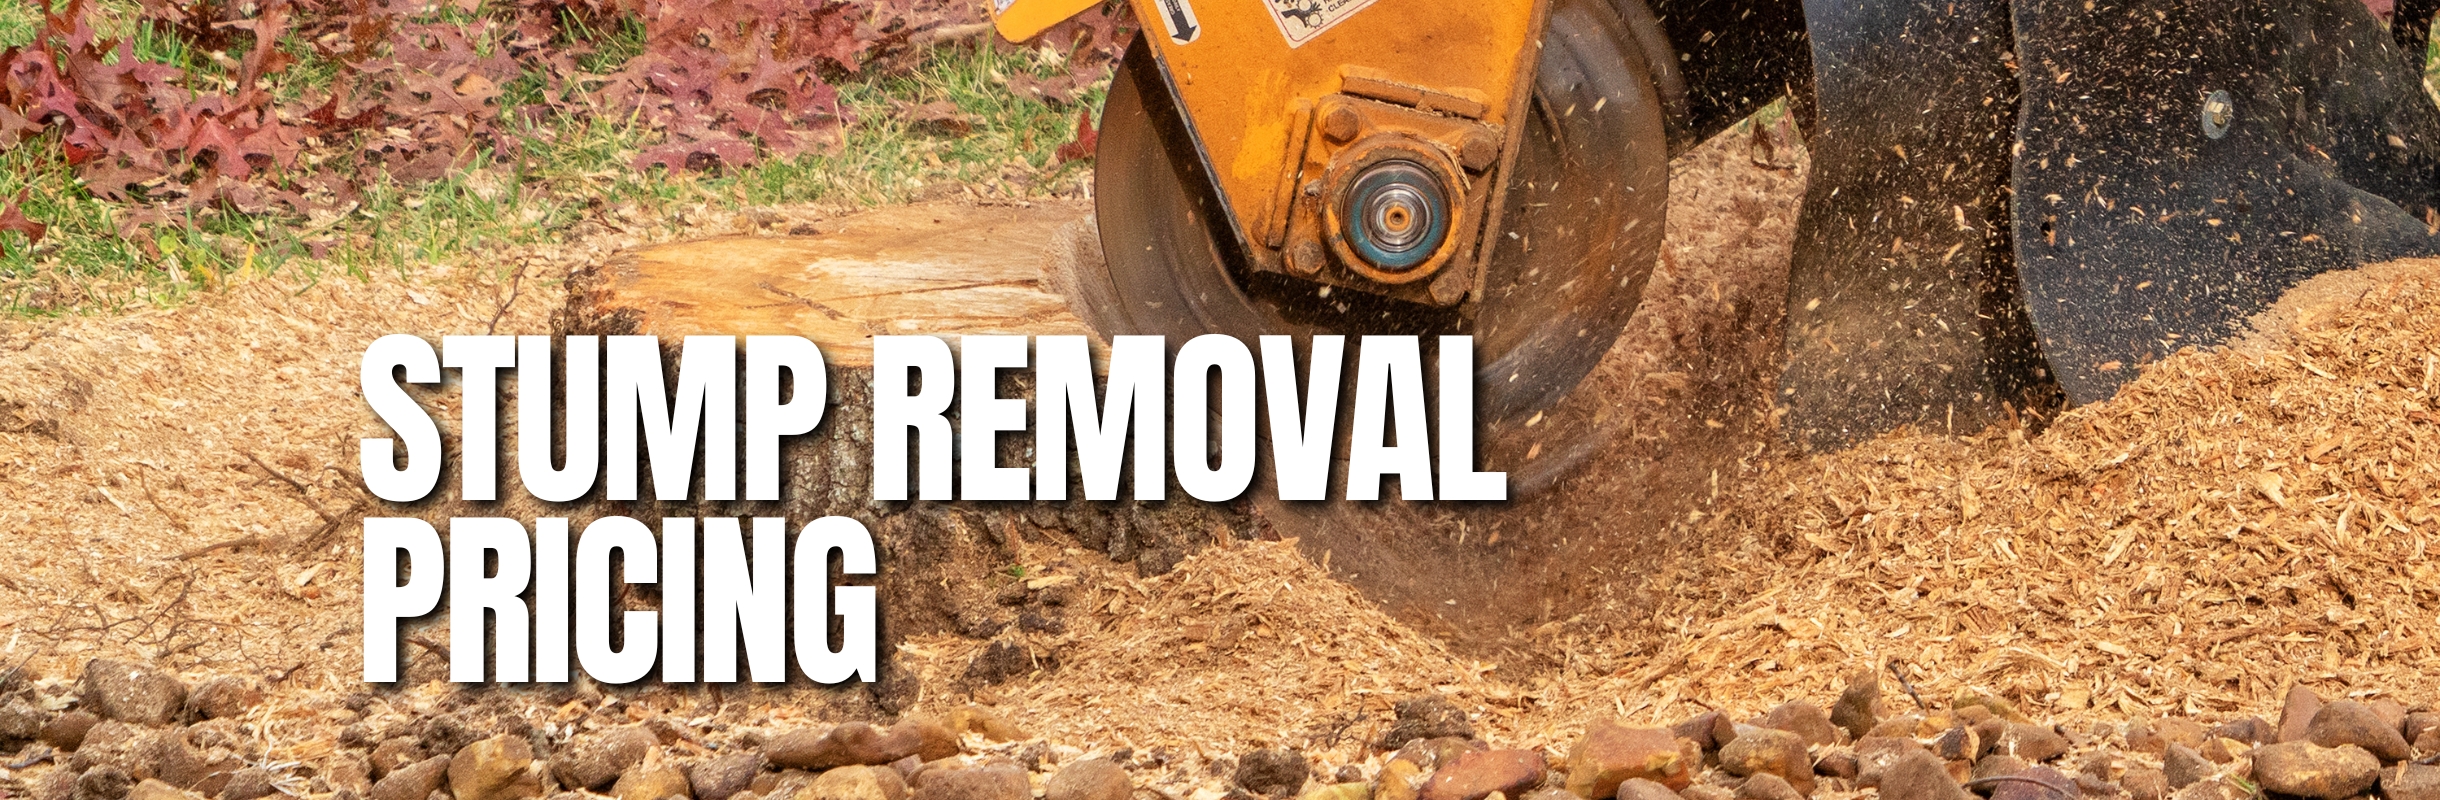 Stump-Removal-Pricing